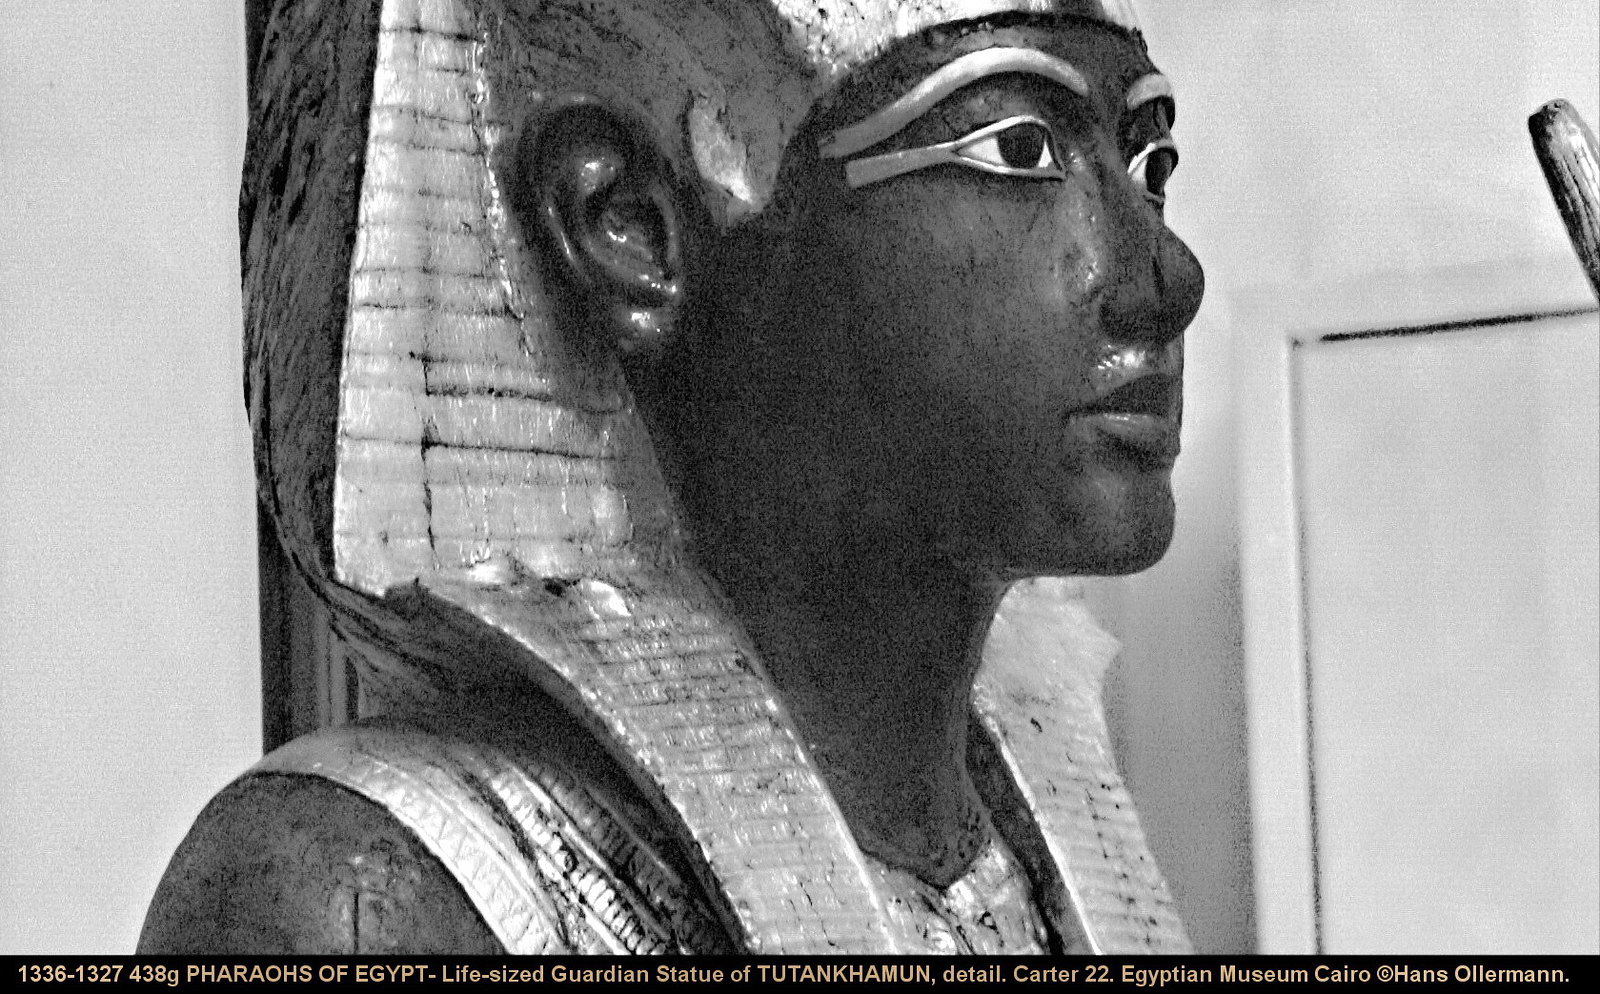 Life-sized Guardian Statue of TUTANKHAMUN, detail. Carter 22. From the North Wall of the Antechamber of his Tomb. CARTER 22. Relevant Burton photo’s, as found in the Howard Carter Archives in Griffith Institute at Oxford University, are: 6,7,16,17,280,281,292,293,320,321,491-496 and 498. JE 60707; Exhib. 96. Tutankhamun was an Egyptian pharaoh of the 18th dynasty (ruled ca. 1332–1323 BC in the conventional chronology), during the period of Egyptian history known as the New Kingdom. He is popularly referred to as King Tut. His original name, Tutankhaten, means "Living Image of Aten", while Tutankhamun means "Living Image of Amun". In hieroglyphs, the name Tutankhamun was typically written Amen-tut-ankh, because of a scribal custom that placed a divine name at the beginning of a phrase to show appropriate reverence. He is possibly also the Nibhurrereya of the Amarna letters, and likely the 18th dynasty king Rathotis who, according to Manetho, an ancient historian, had reigned for nine years—a figure that conforms with Flavius Josephus's version of Manetho's Epitome. The 1922 discovery by Howard Carter and George Herbert, 5th Earl of Carnarvon of Tutankhamun's nearly intact tomb received worldwide press coverage. It sparked a renewed public interest in ancient Egypt, for which Tutankhamun's burial mask, now in Cairo Museum, remains the popular symbol. Exhibits of artifacts from his tomb have toured the world. In February 2010, the results of DNA tests confirmed that he was the son of Akhenaten (mummy KV55) and Akhenaten's sister and wife (mummy KV35YL), whose name is unknown but whose remains are positively identified as "The Younger Lady" mummy found in KV35. Life Tutankhamun was the son of Akhenaten (formerly Amenhotep IV) and one of Akhenaten's sisters, or perhaps one of his cousins. As a prince he was known as Tutankhaten. He ascended to the throne in 1333 BC, at the age of nine or ten, taking the throne name Nebkheperure. His wet-nurse was a woman called Maia, known from her tomb at Saqqara. A teacher was most likely Sennedjem. When he became king, he married his half-sister, Ankhesenpaaten, who later changed her name to Ankhesenamun. They had two daughters, both stillborn. Computed tomography studies released in 2011 revealed that one daughter died at 5–6 months of pregnancy and the other at 9 months of pregnancy. No evidence was found in either mummy of congenital anomalies or an apparent cause of death. Reign Given his age, the king probably had very powerful advisers, presumably including General Horemheb and the Vizier Ay. Horemheb records that the king appointed him "lord of the land" as hereditary prince to maintain law. He also noted his ability to calm the young king when his temper flared. In his third regnal year, Tutankhamun reversed several changes made during his father's reign. He ended the worship of the god Aten and restored the god Amun to supremacy. The ban on the cult of Amun was lifted and traditional privileges were restored to its priesthood. The capital was moved back to Thebes and the city of Akhetaten abandoned. This is when he changed his name to Tutankhamun, "Living image of Amun", reinforcing the restoration of Amun. As part of his restoration, the king initiated building projects, in particular at Thebes and Karnak, where he dedicated a temple to Amun. Many monuments were erected, and an inscription on his tomb door declares the king had "spent his life in fashioning the images of the gods". The traditional festivals were now celebrated again, including those related to the Apis Bull, Horemakhet, and Opet. His restoration stela says: The temples of the gods and goddesses ... were in ruins. Their shrines were deserted and overgrown. Their sanctuaries were as non-existent and their courts were used as roads ... the gods turned their backs upon this land ... If anyone made a prayer to a god for advice he would never respond. The country was economically weak and in turmoil following the reign of Akhenaten. Diplomatic relations with other kingdoms had been neglected, and Tutankhamun sought to restore them, in particular with the Mitanni. Evidence of his success is suggested by the gifts from various countries found in his tomb. Despite his efforts for improved relations, battles with Nubians and Asiatics were recorded in his mortuary temple at Thebes. His tomb contained body armor and folding stools appropriate for military campaigns. However, given his youth and physical disabilities, which seemed to require the use of a cane in order to walk (he died c. age 19), historians speculate that he did not personally take part in these battles. Health and appearance Tutankhamun was slight of build, and was roughly 180 cm (5 ft 11 in) tall. He had la